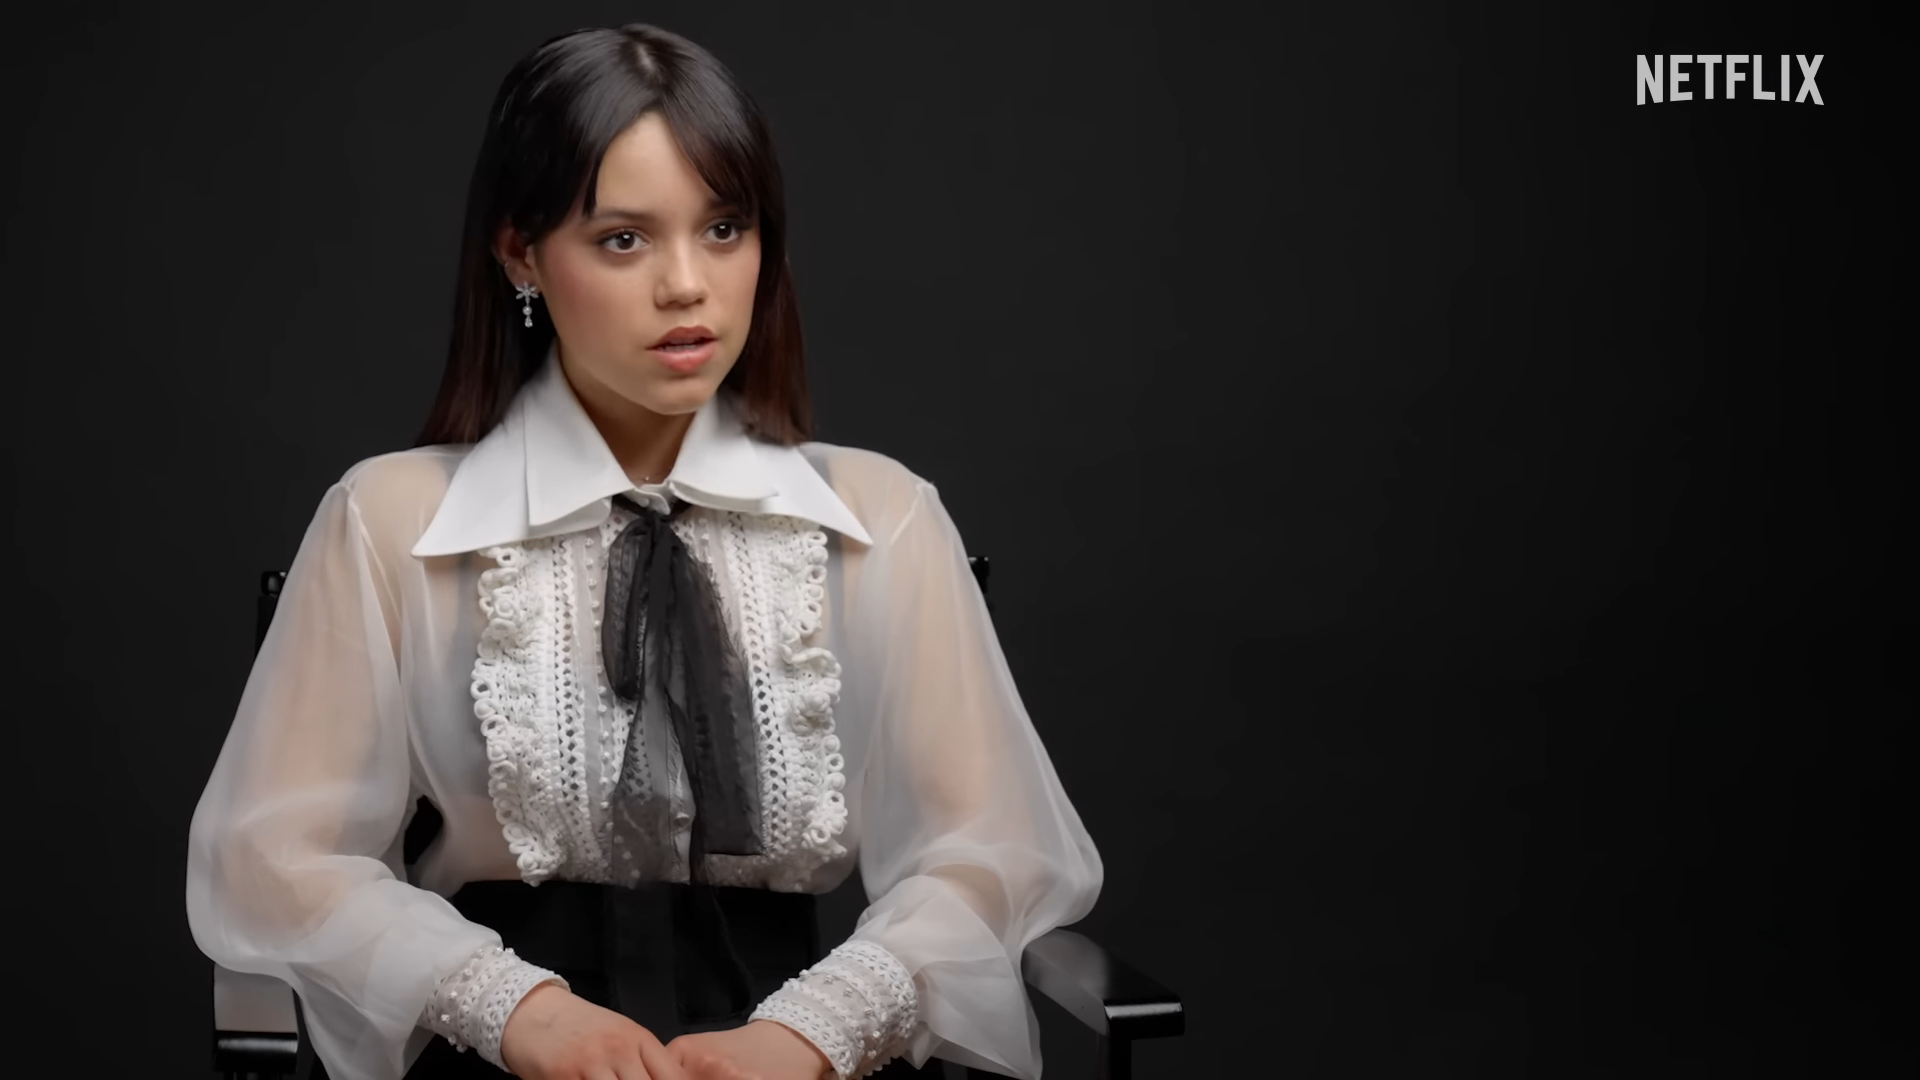 Jenna Ortega Discusses Her Role as Wednesday Addams in the Upcoming Netflix Series and the Importance of Representation. Trevor Decker News